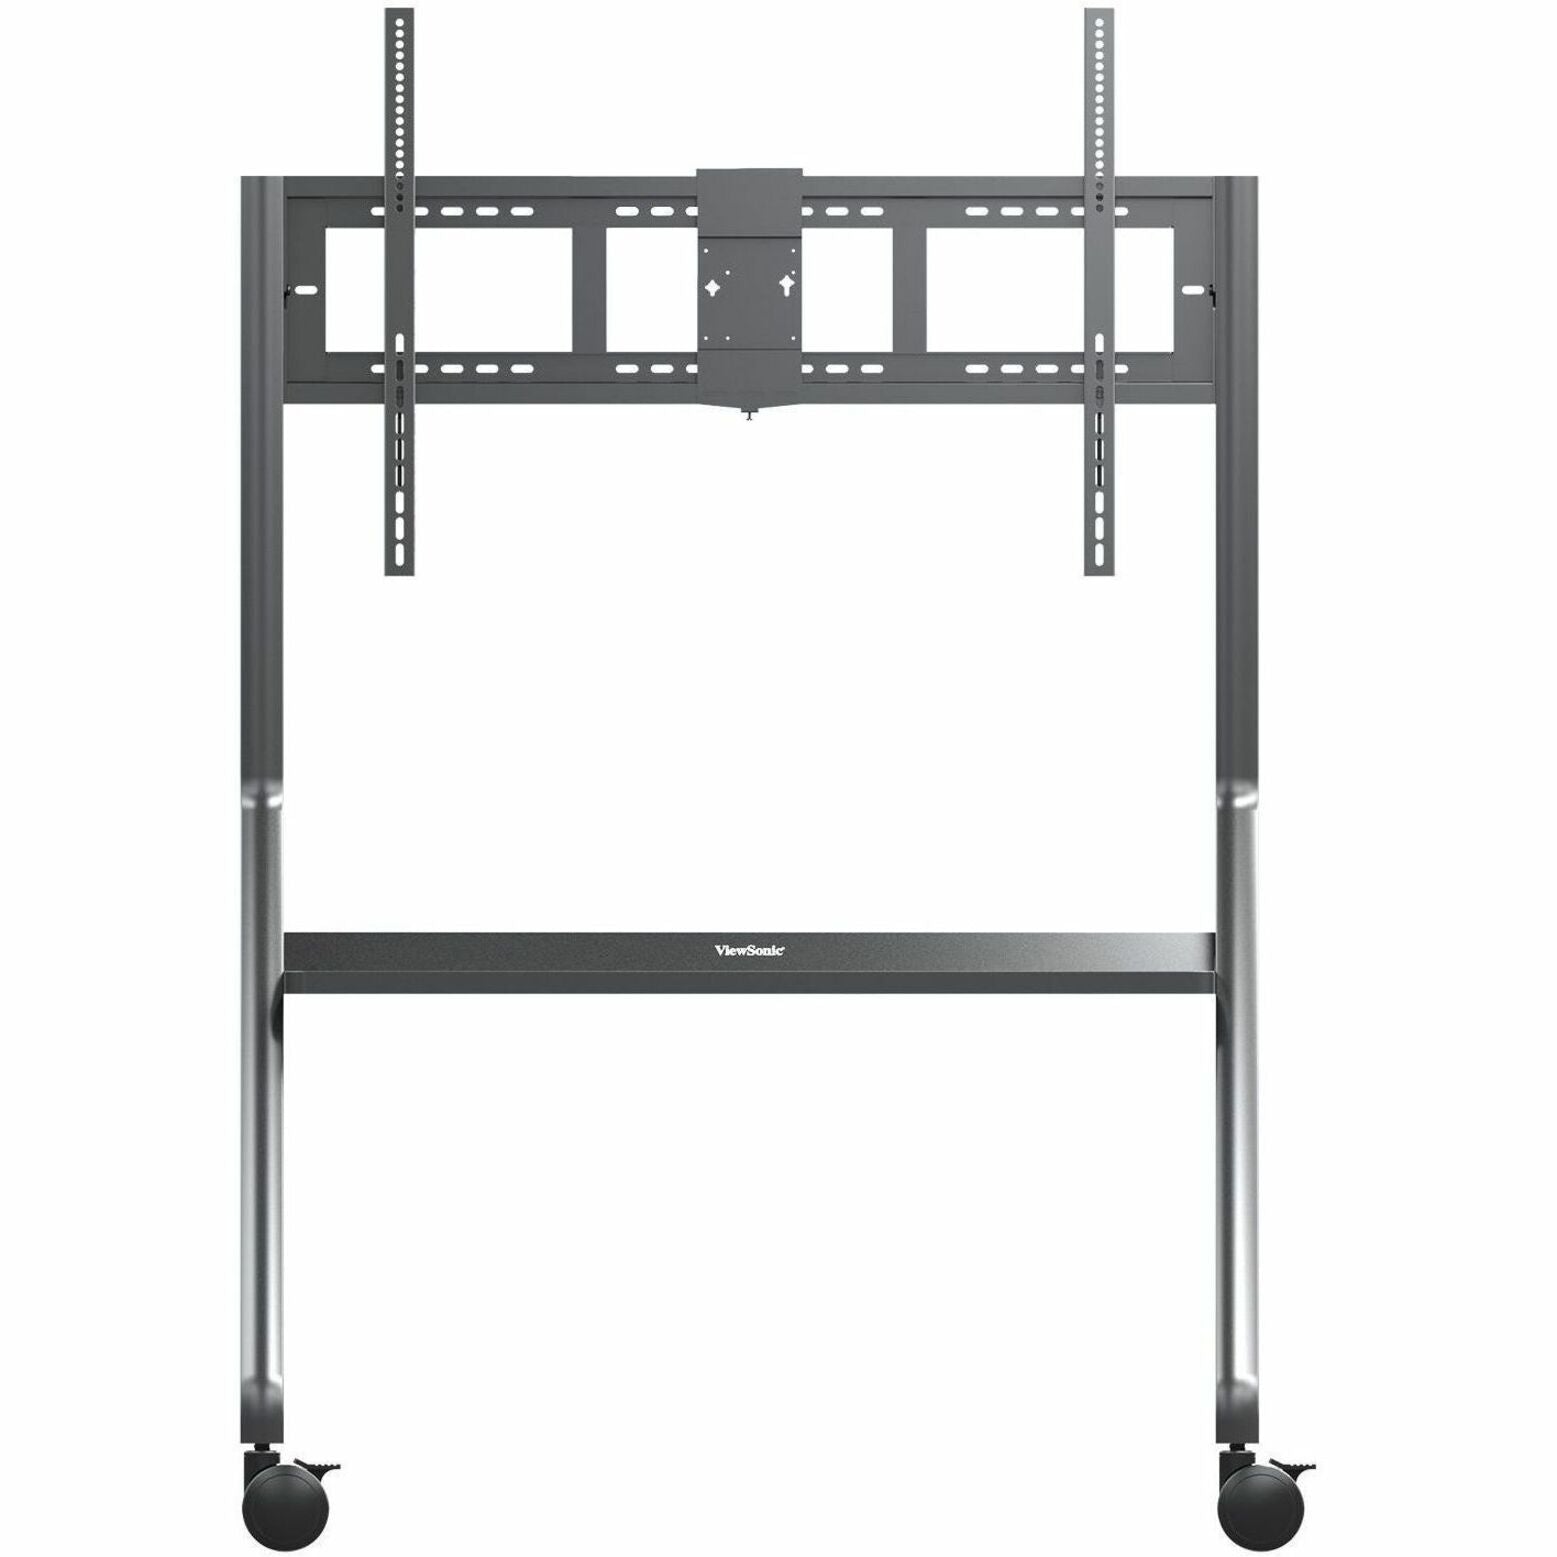 ViewSonic VB-STND-009 Display Cart, Storage Tray, Compact, Maneuverable, 360° Swivel, Mobility, Robust, Adjustable Height, Locking Casters